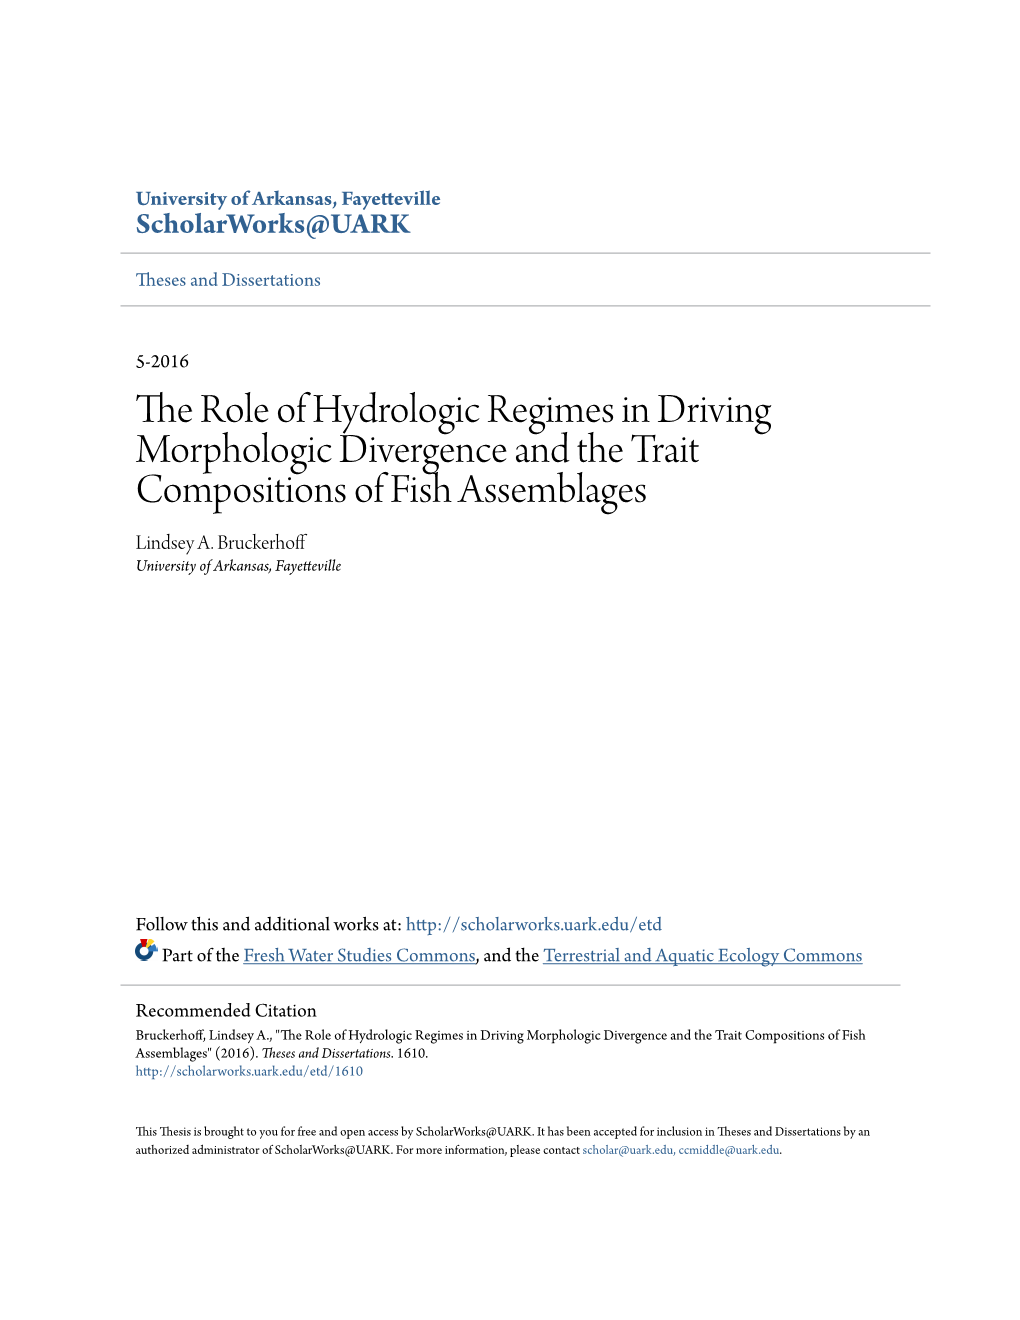 The Role of Hydrologic Regimes in Driving Morphologic Divergence and the Trait Compositions of Fish Assemblages Lindsey A